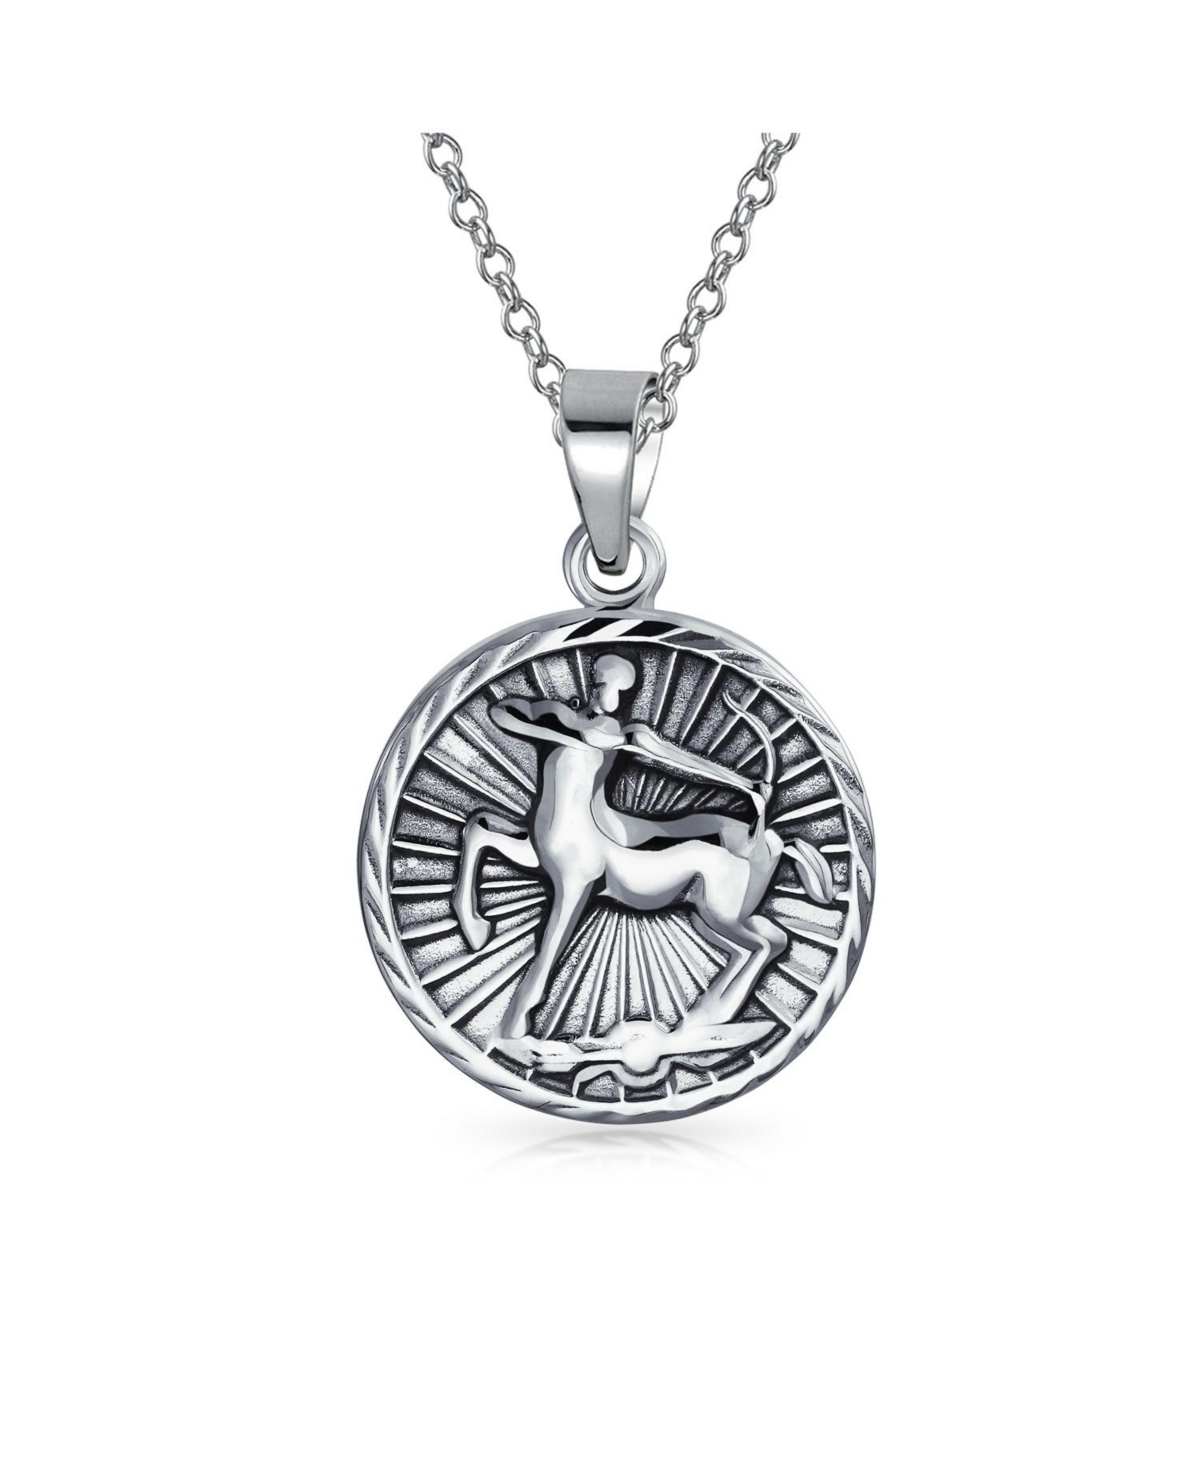 Sagittarius Zodiac Sign Astrology Horoscope Round Medallion Pendant For Men Women Necklace Antiqued Sterling Silver - Silver